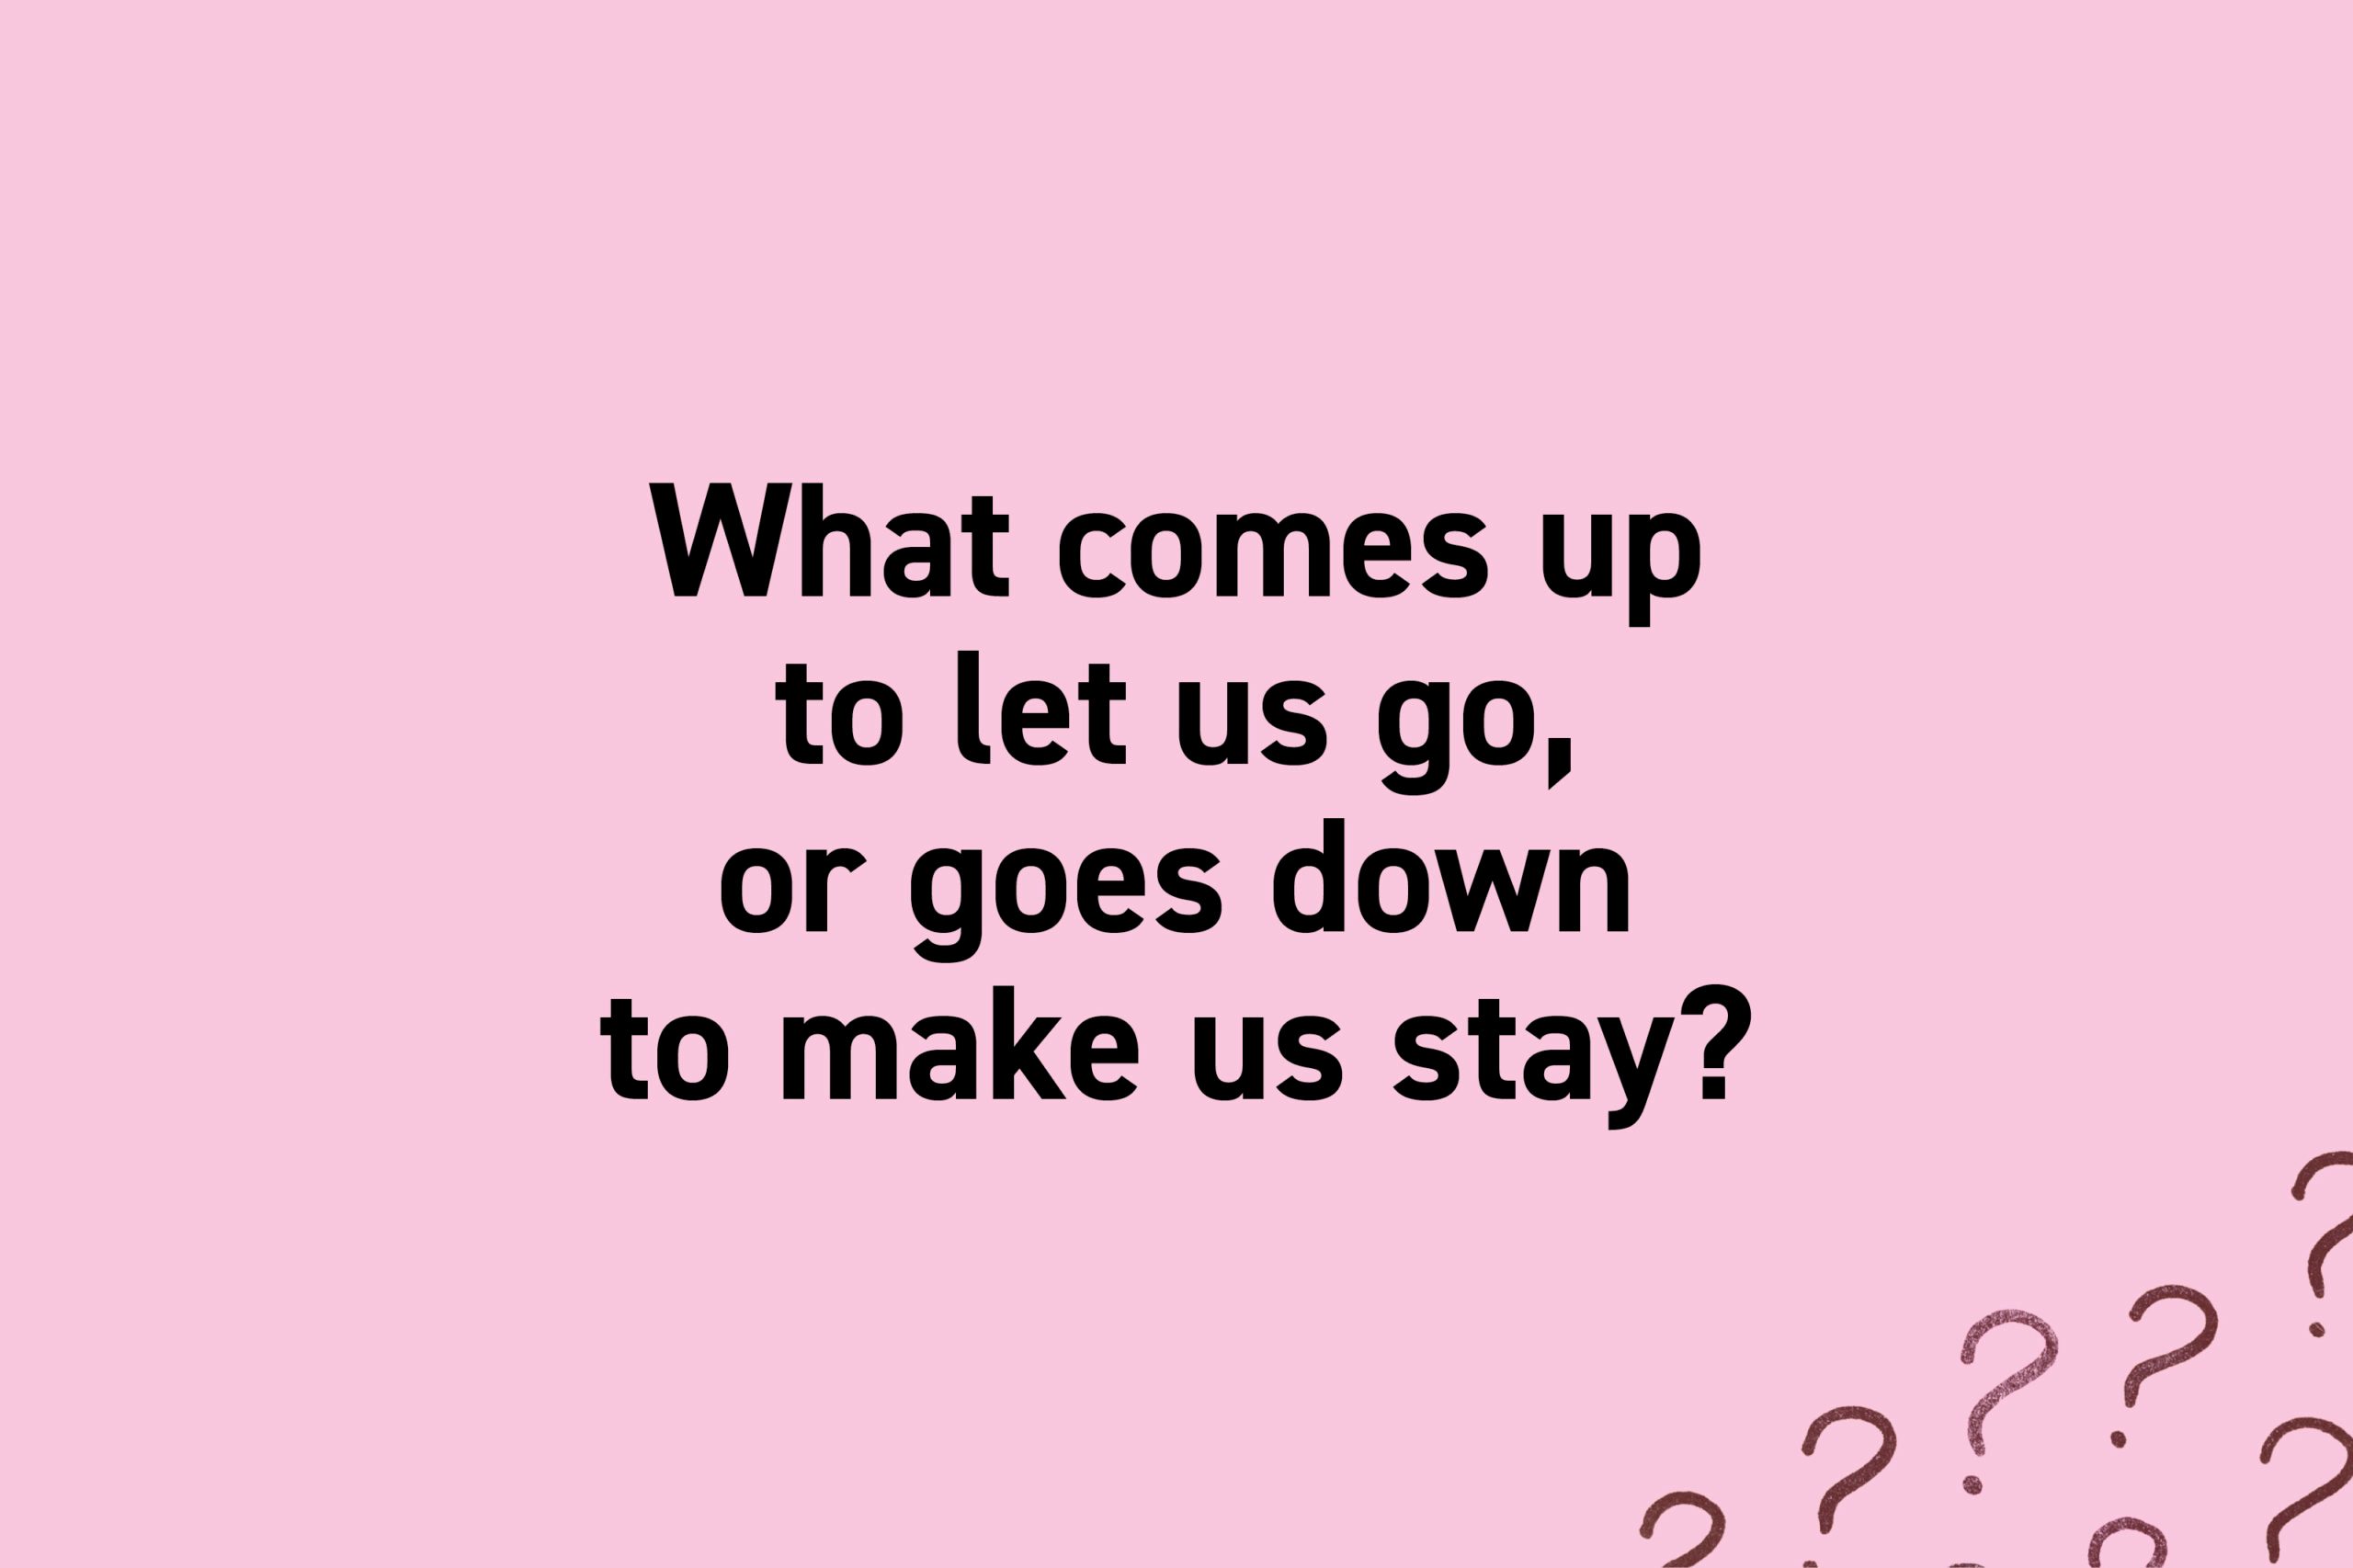 What comes up to let us go, or goes down to make us stay?